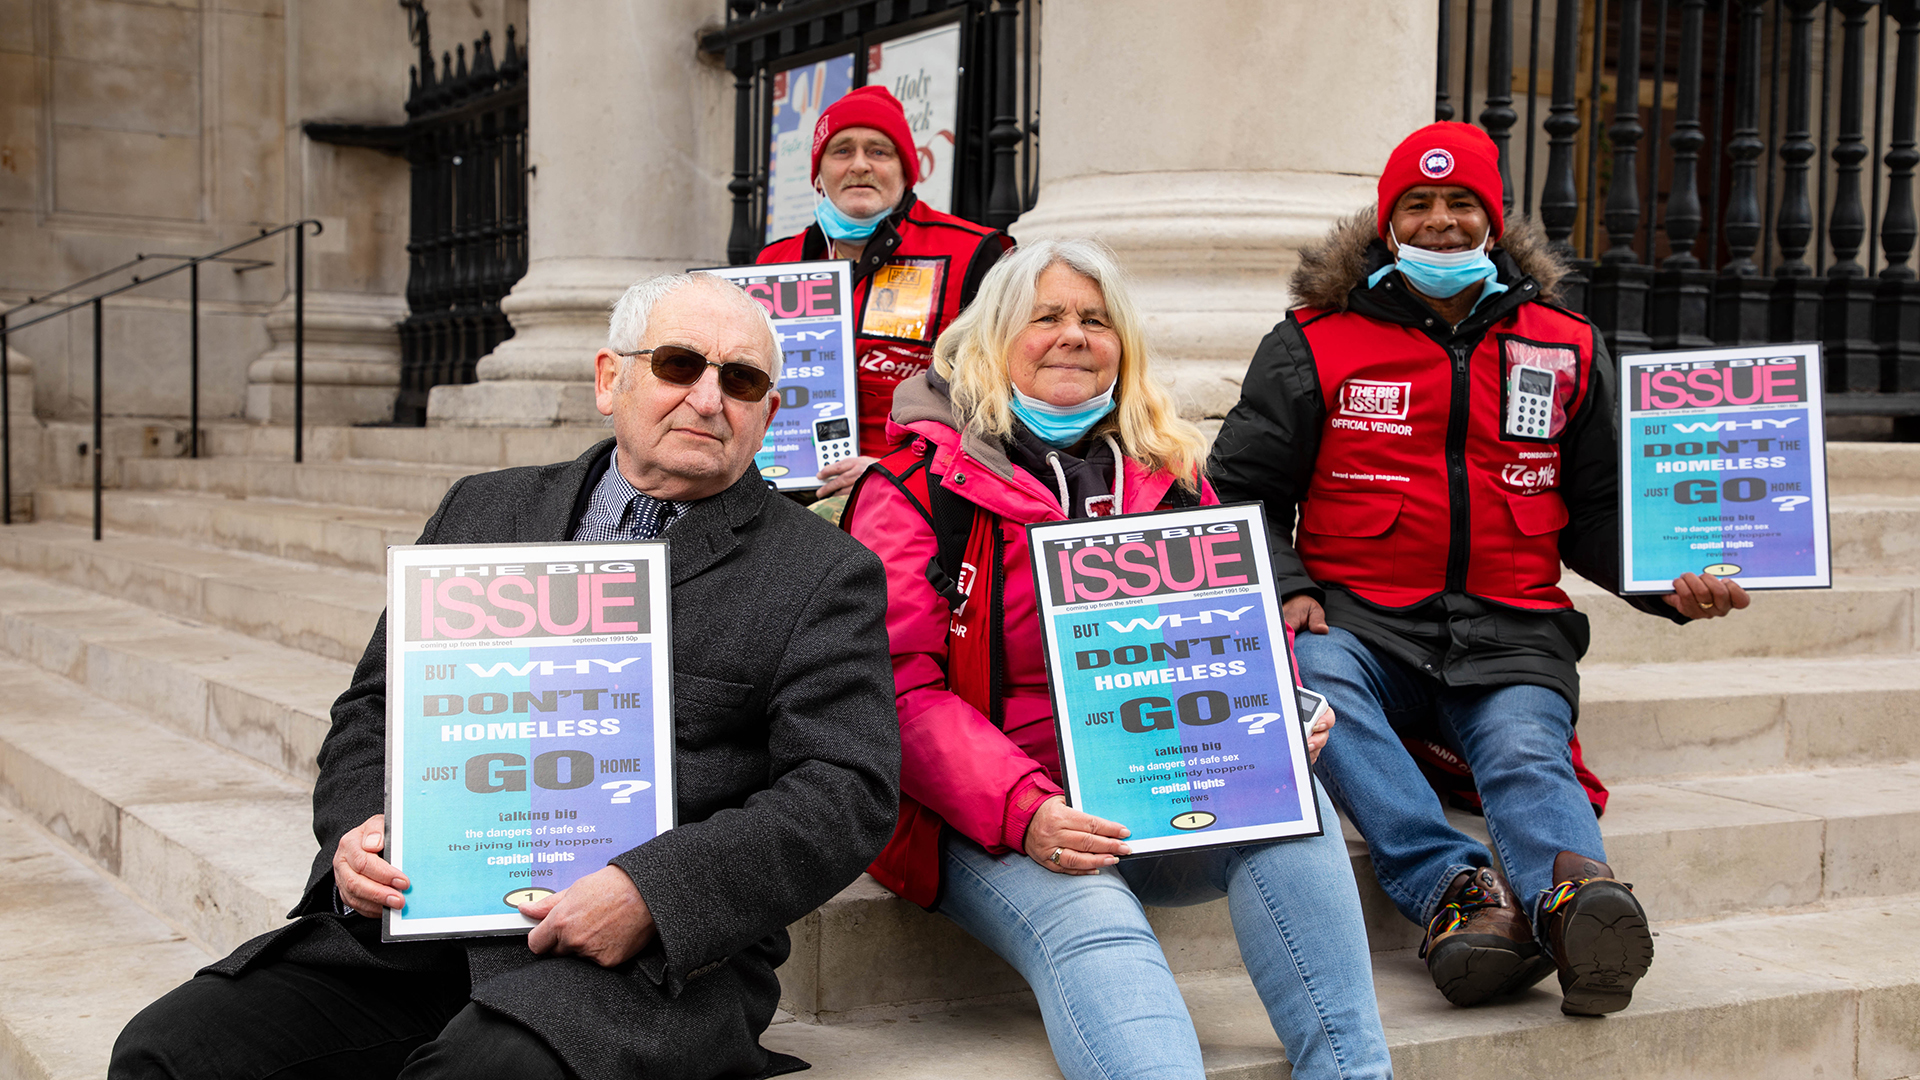 Big Issue vendors return to the streets this week as we keep fighting to prevent homelessness